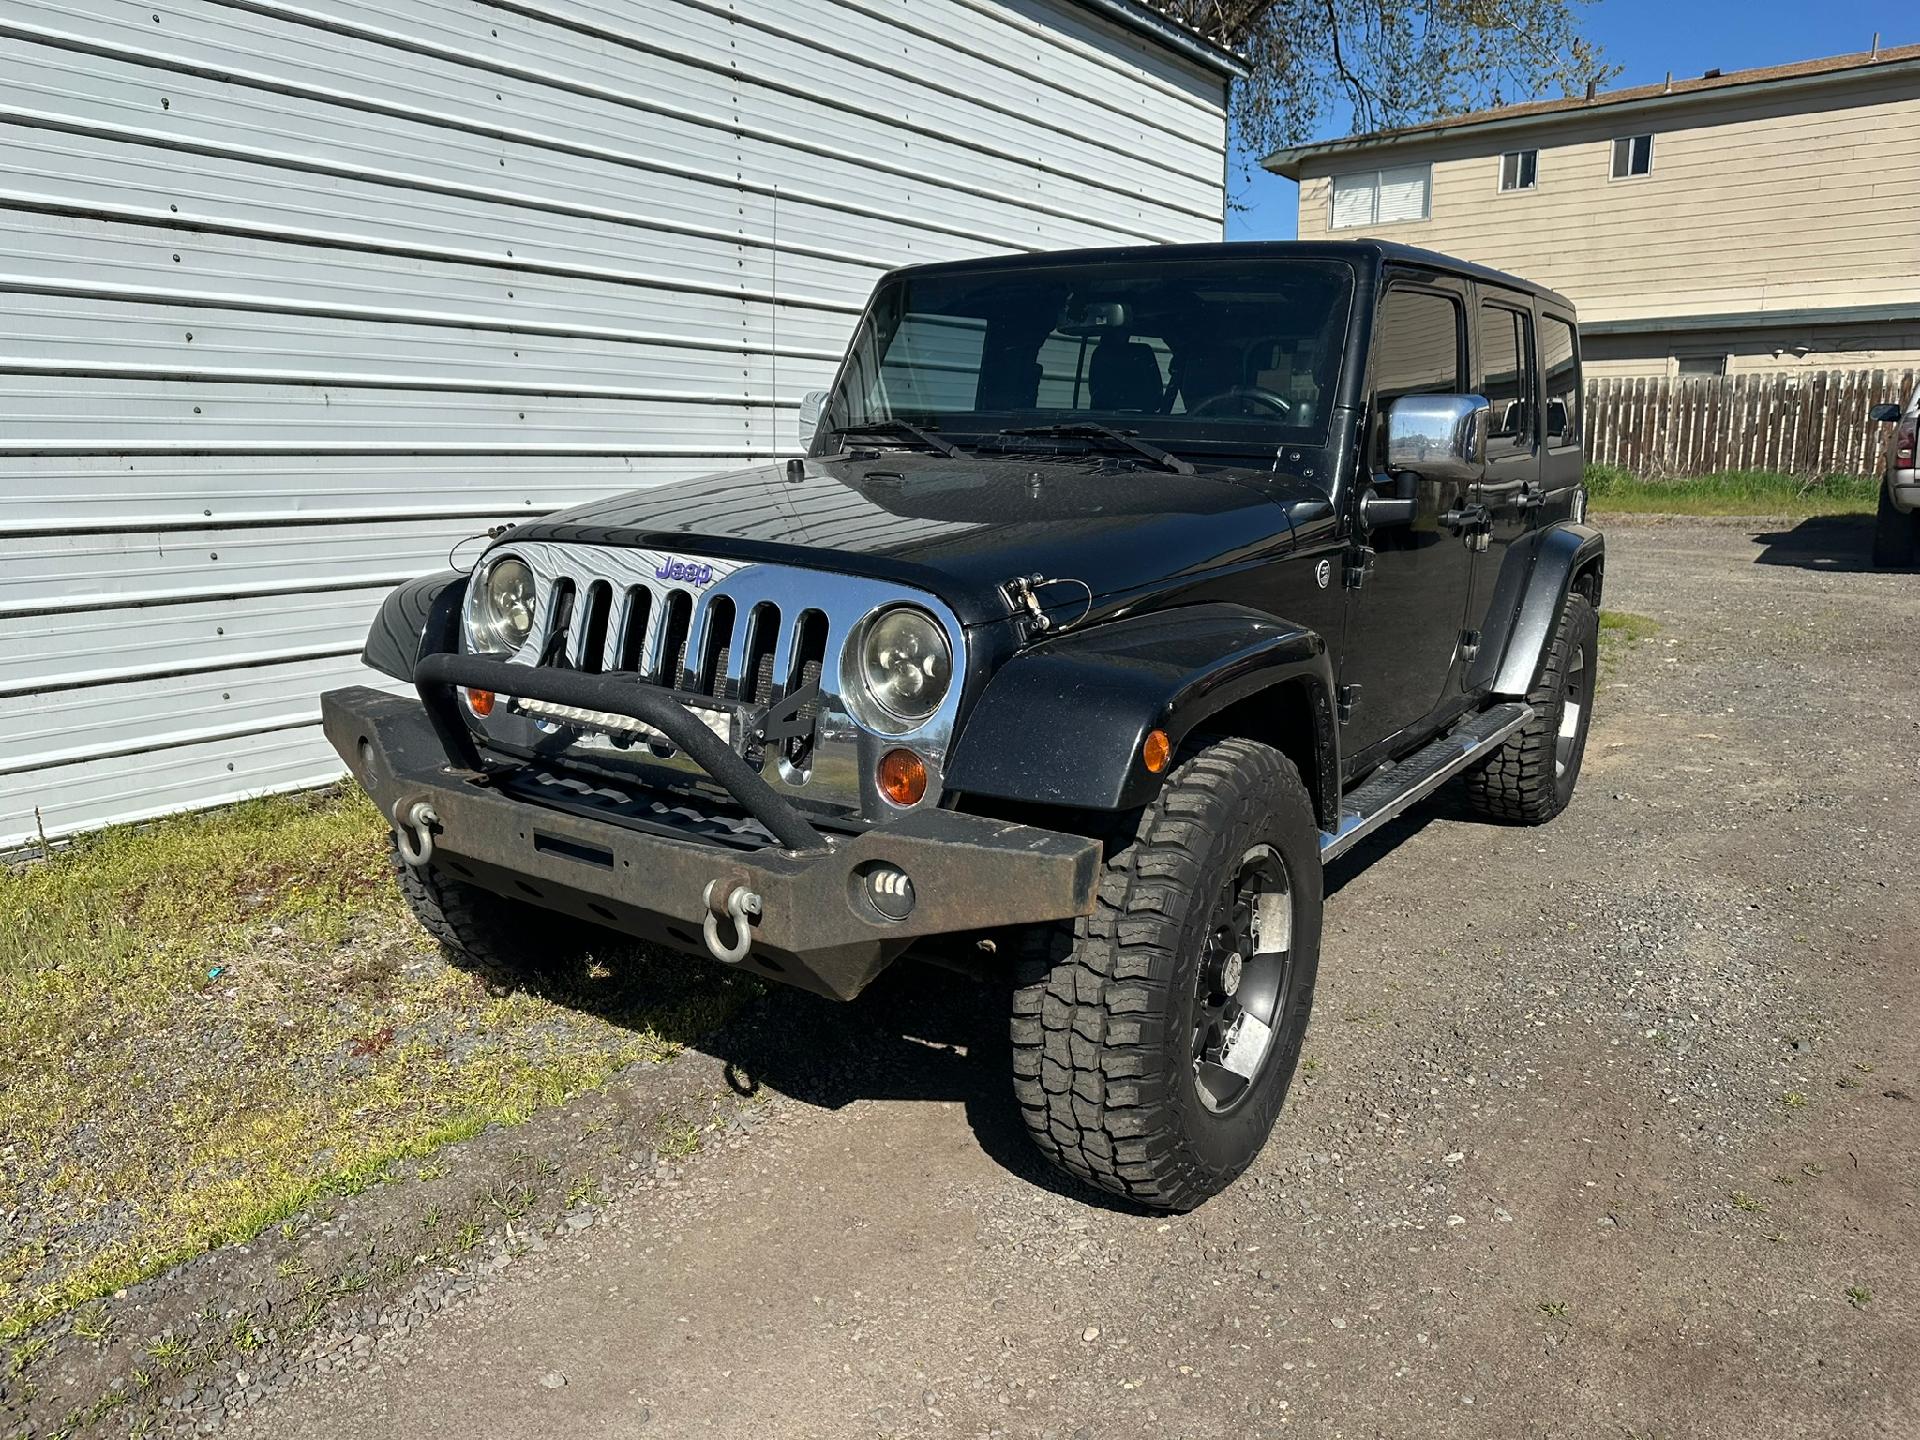 Used 2013 Jeep Wrangler Unlimited Sahara with VIN 1C4BJWEG6DL507469 for sale in Lewiston, ID